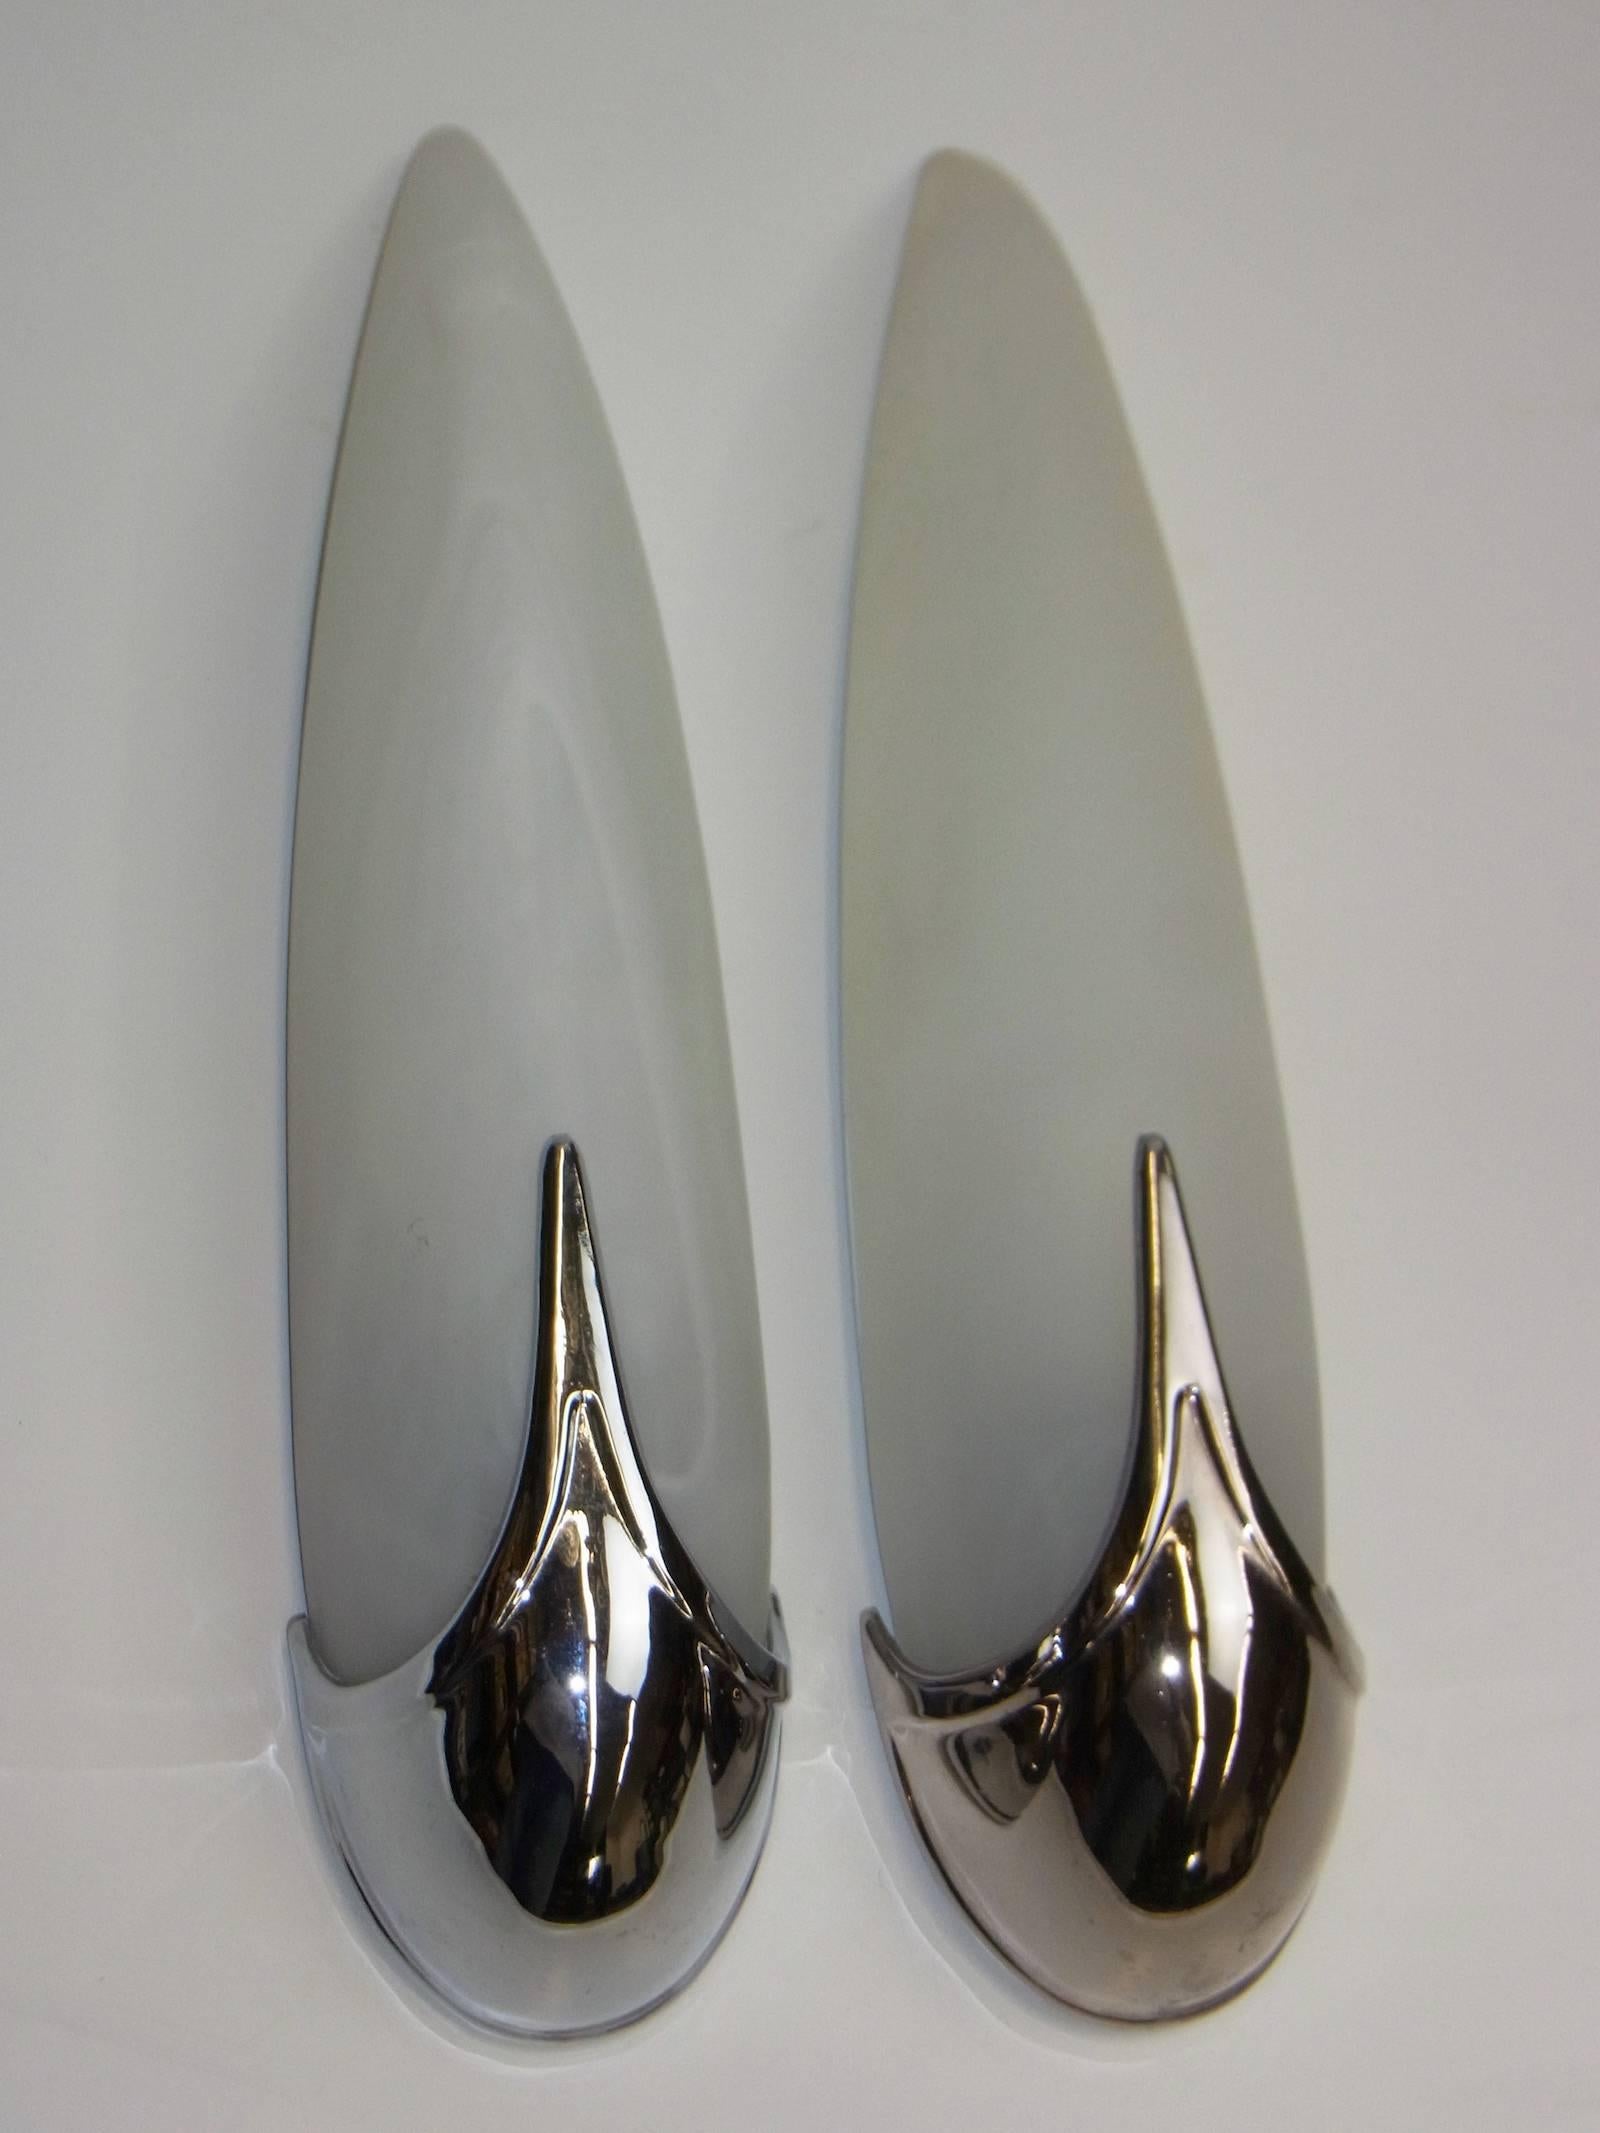 A pair of vintage Art Deco style, French flush mount sconces, each cut-glass shade in a Chrome mounting, it is satin opal style glass. Good condition, with minor age appropriate wear to the satin opal glass surface. Each Fixture requires one